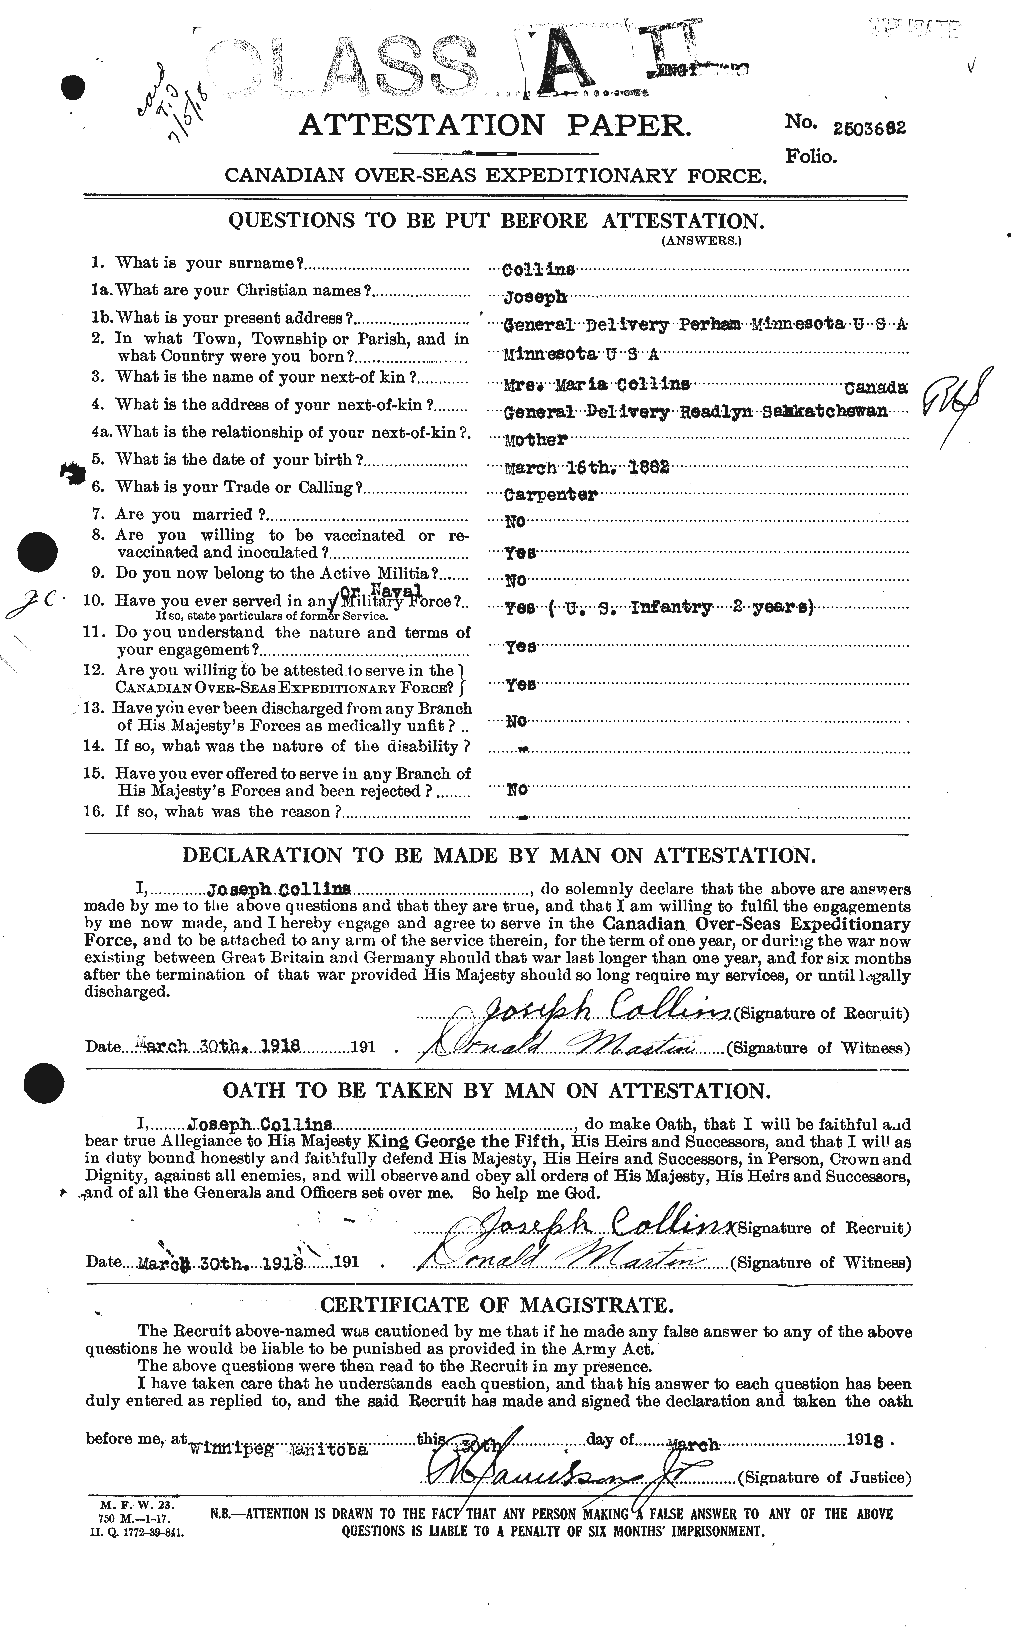 Personnel Records of the First World War - CEF 069520a